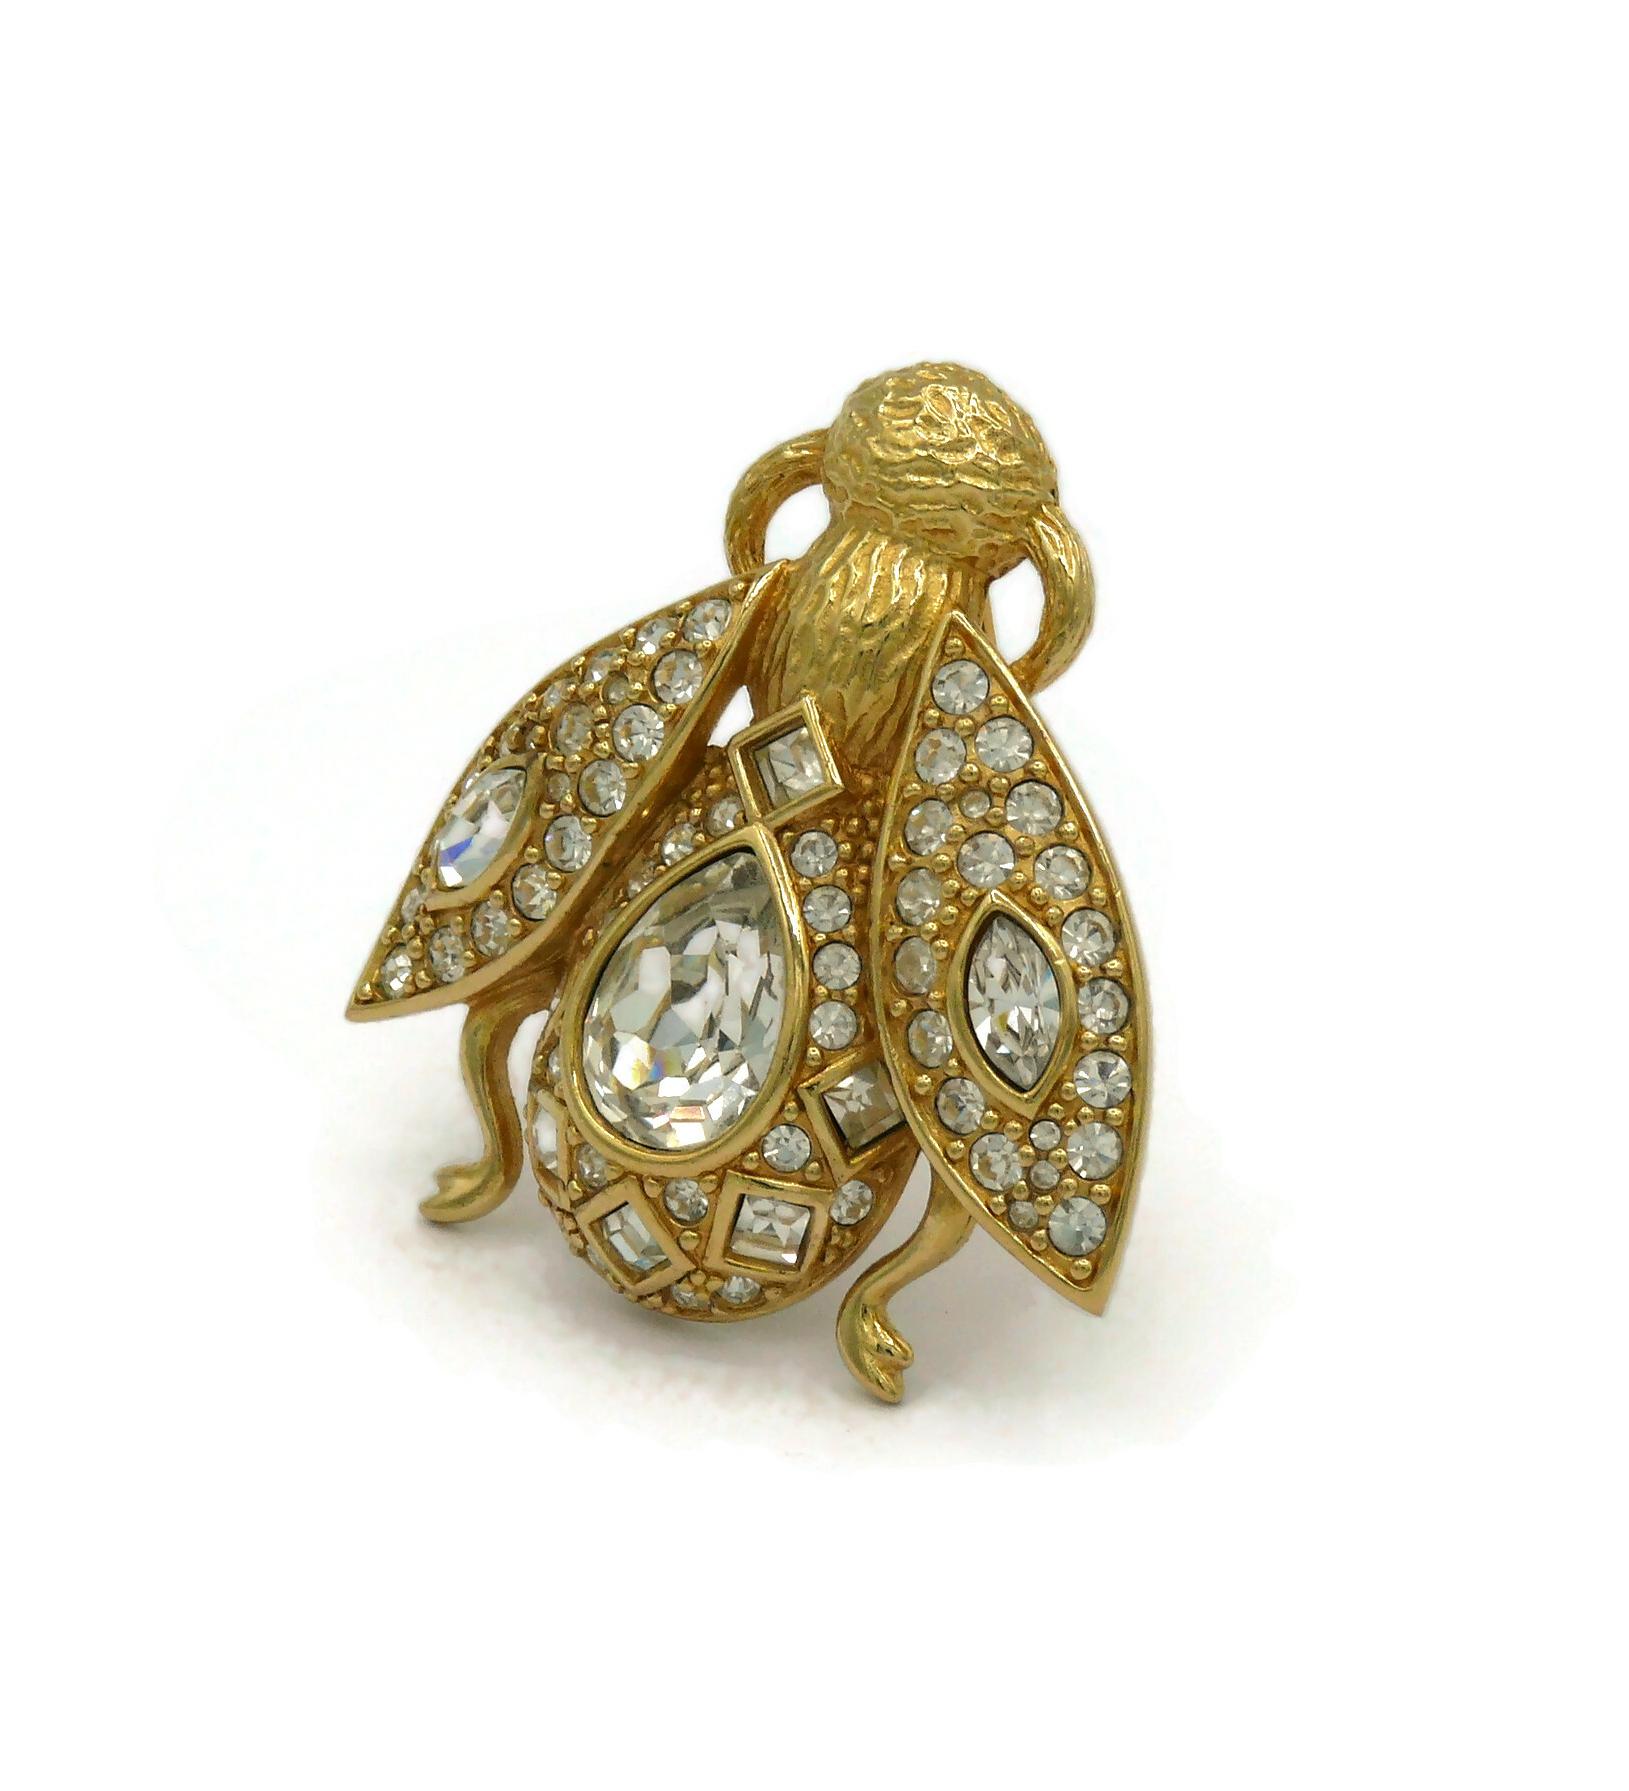 CHRISTIAN DIOR Vintage Iconic Jewelled Bee Brooch In Good Condition For Sale In Nice, FR